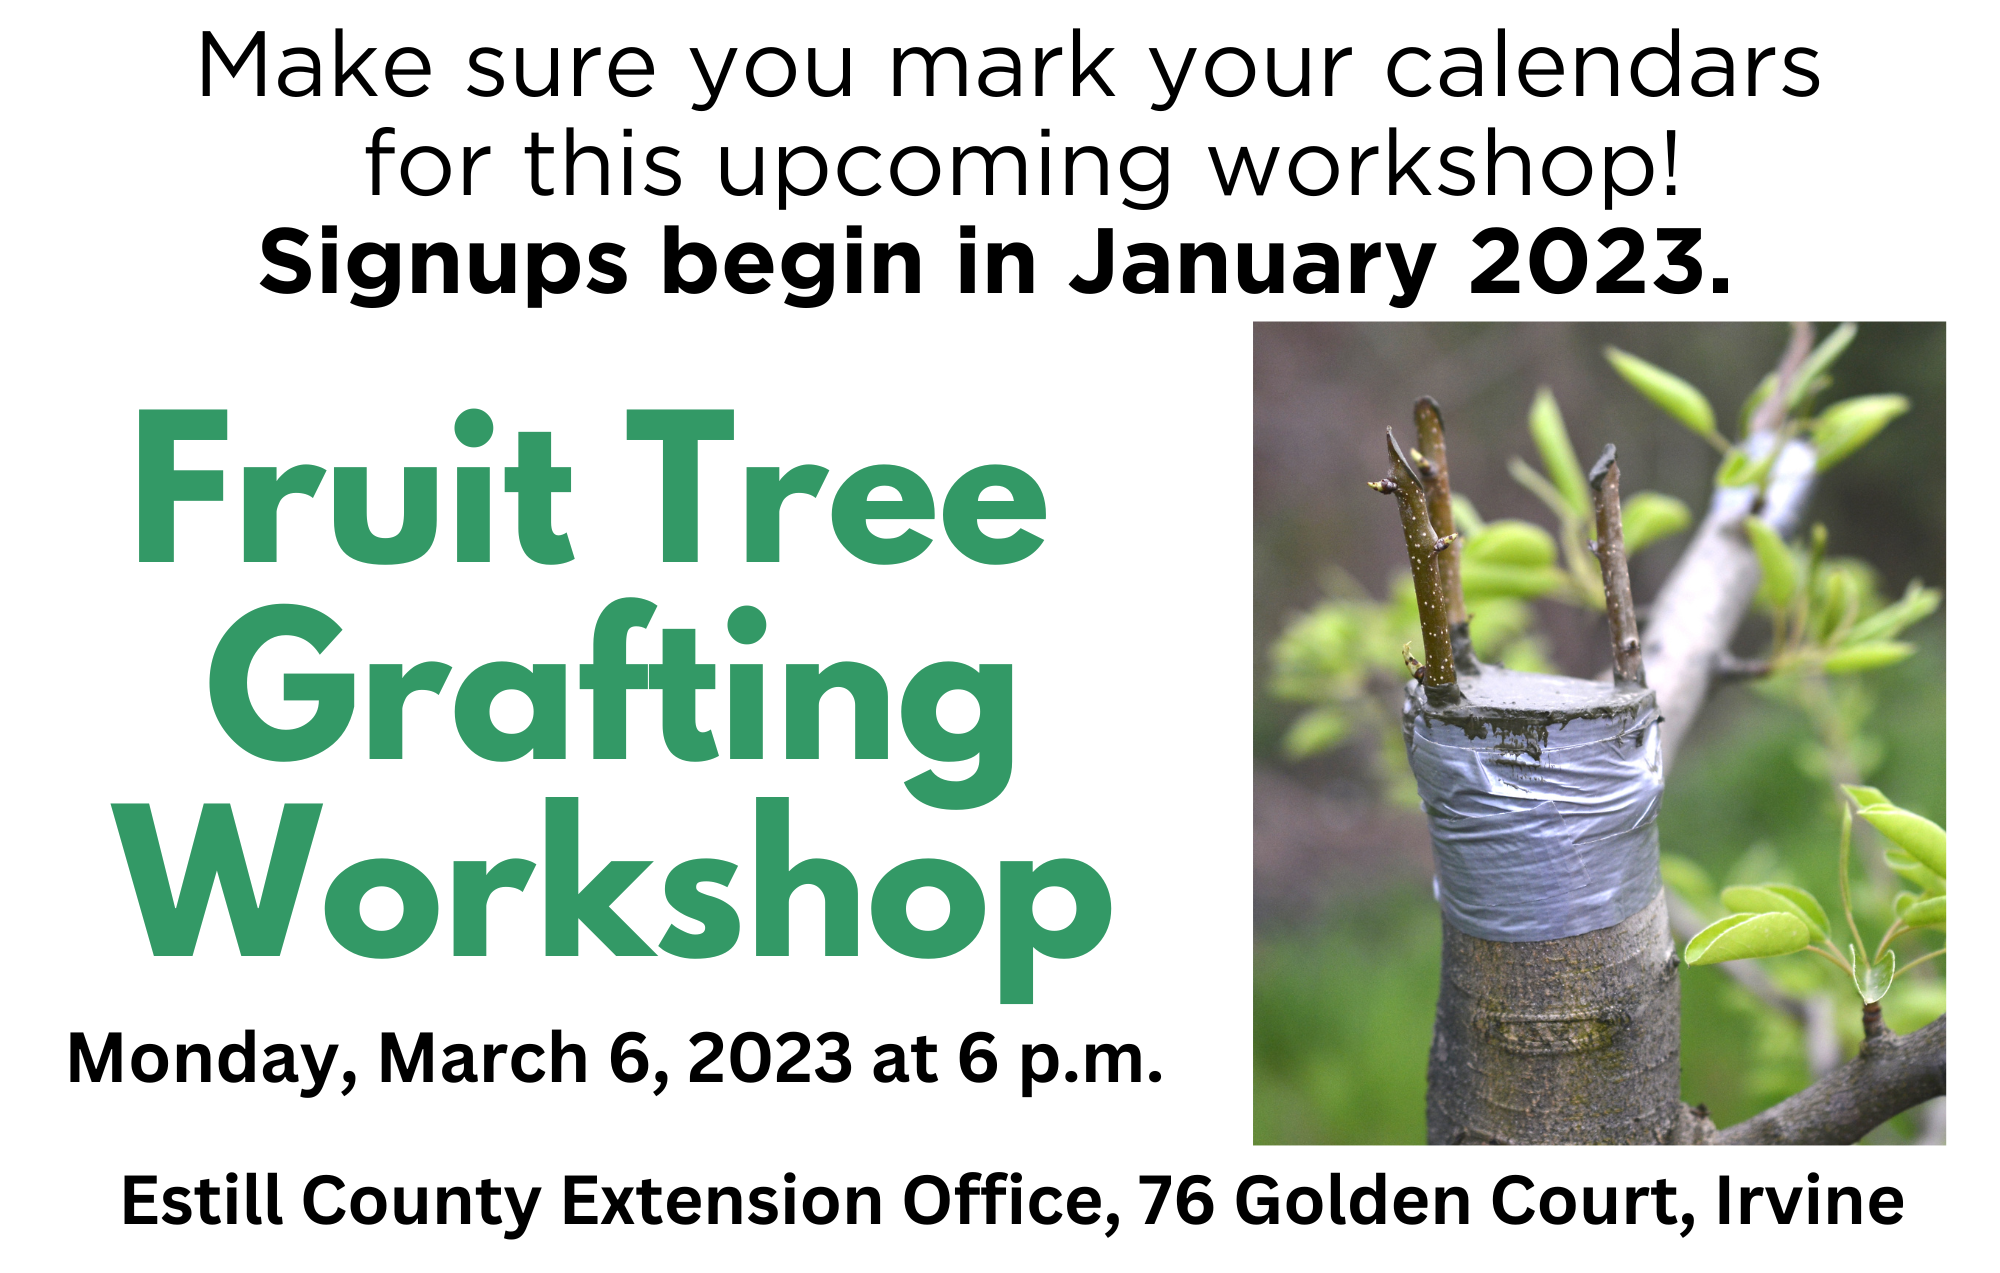 Flyer with details on Fruit Tree Grafting Workshop that will be held March 6, 2023